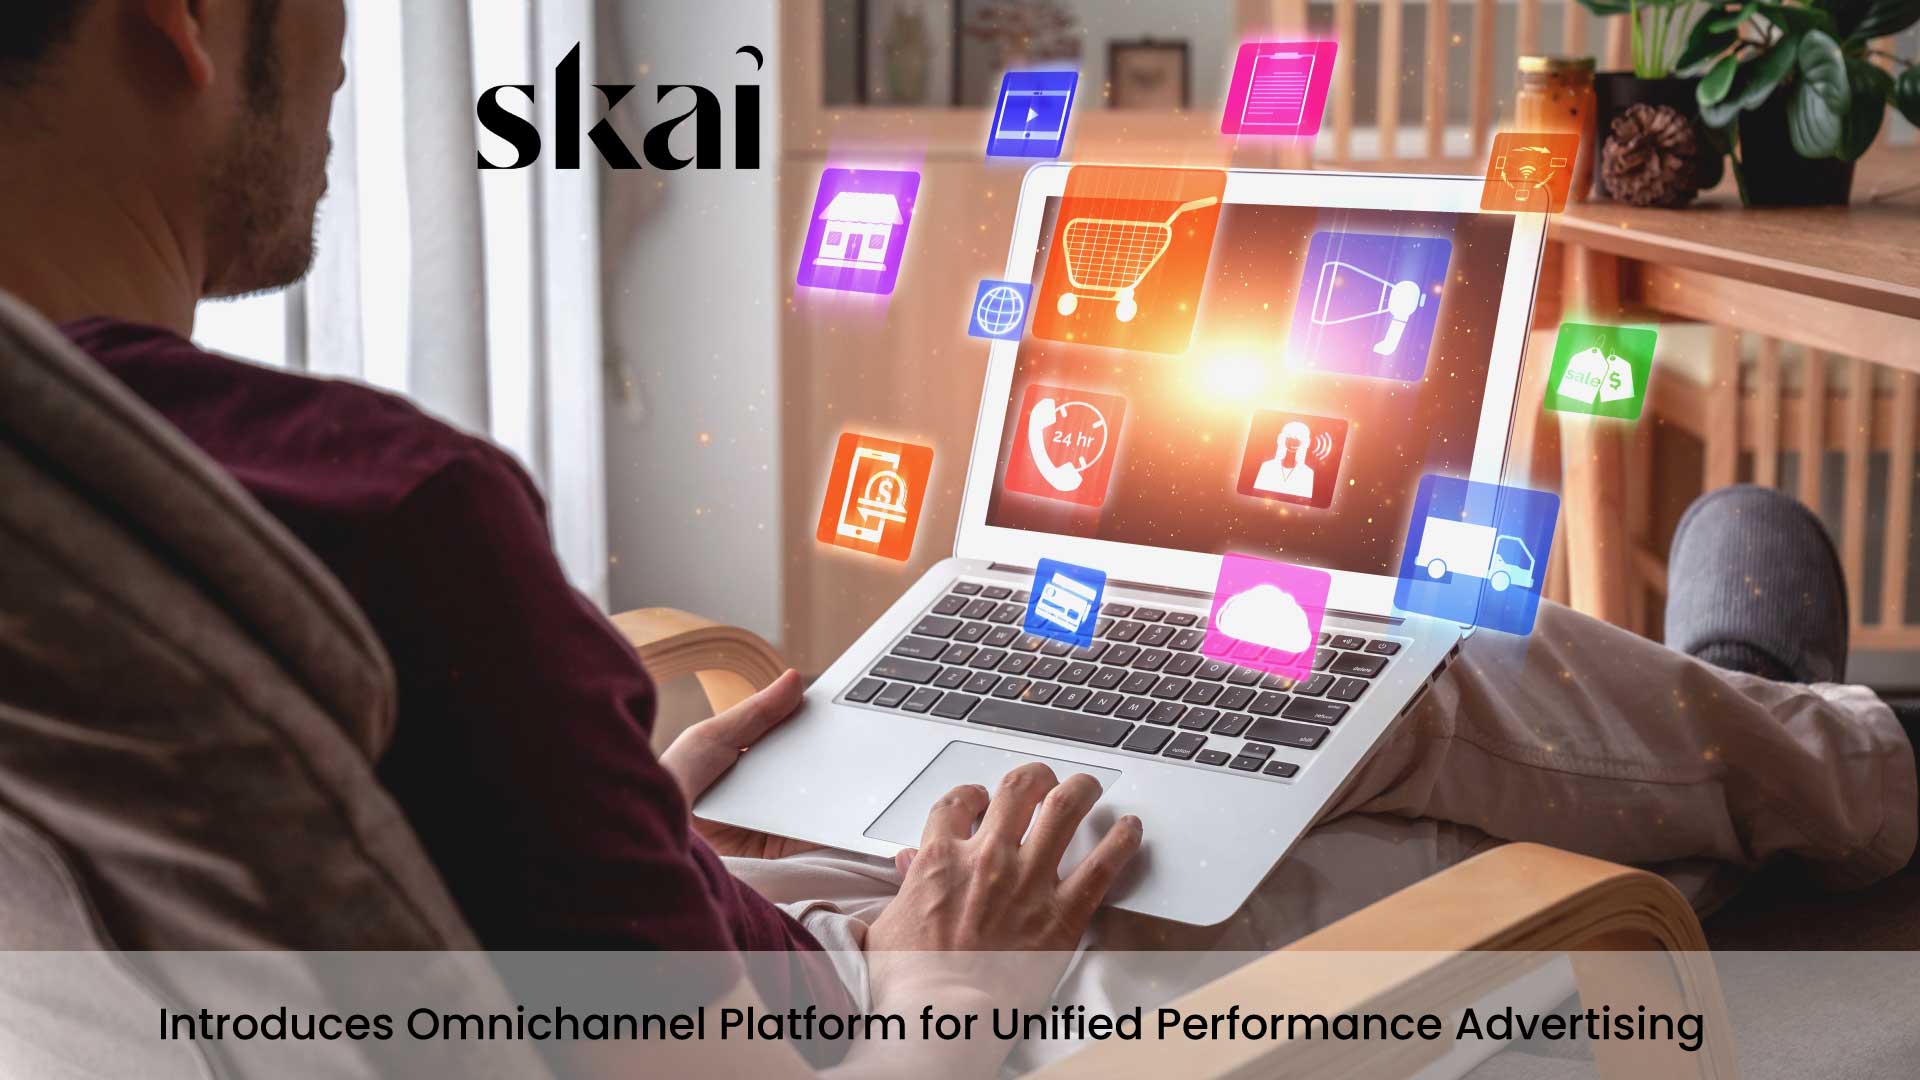 Skai Introduces first of its kind Omnichannel Platform for Unified Performance Advertising